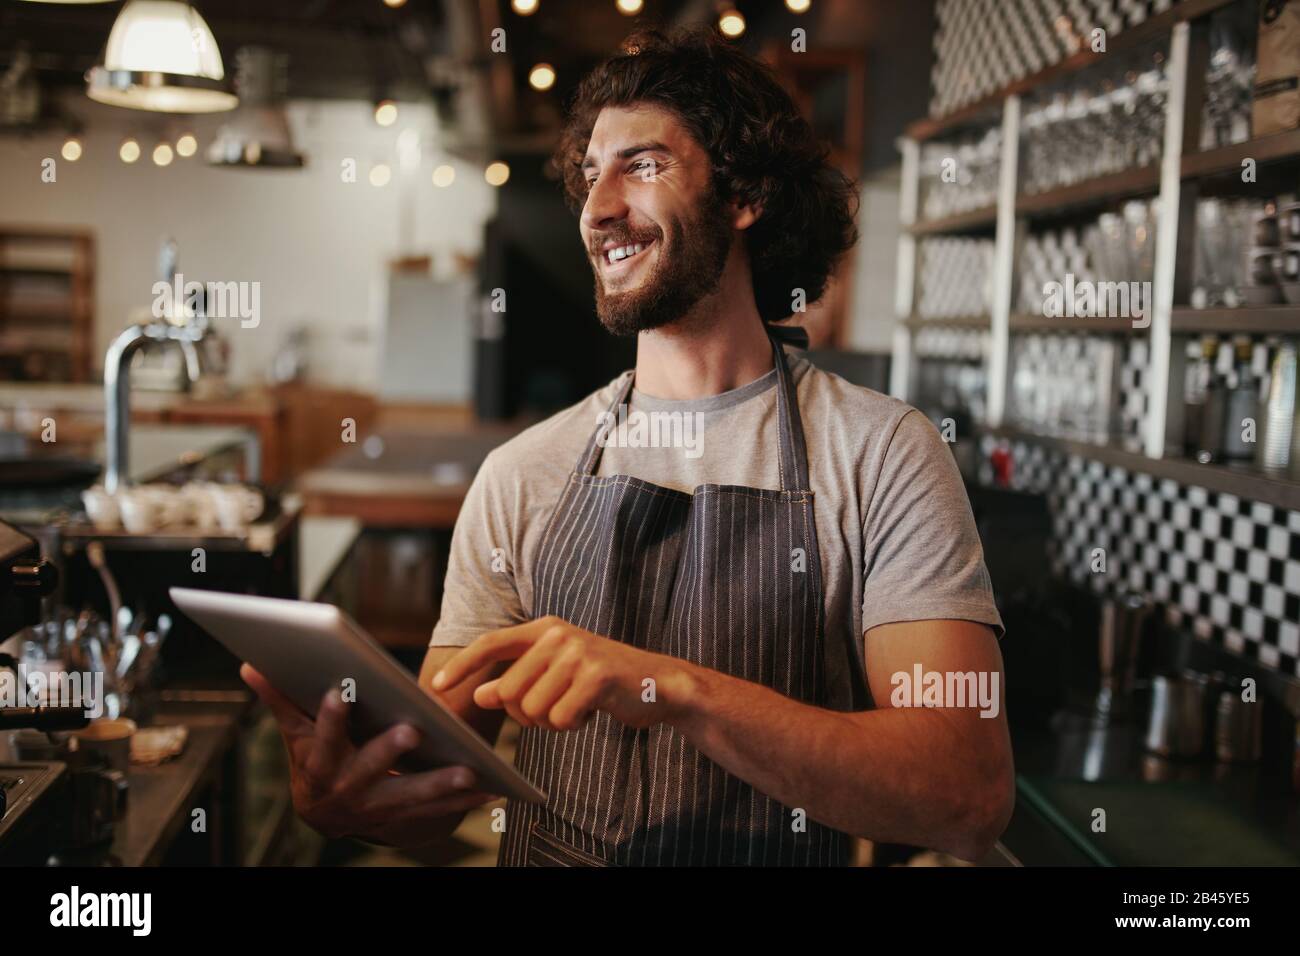 Portrait of successful young caucasian cafe owner standing behind counter using digital tablet Stock Photo